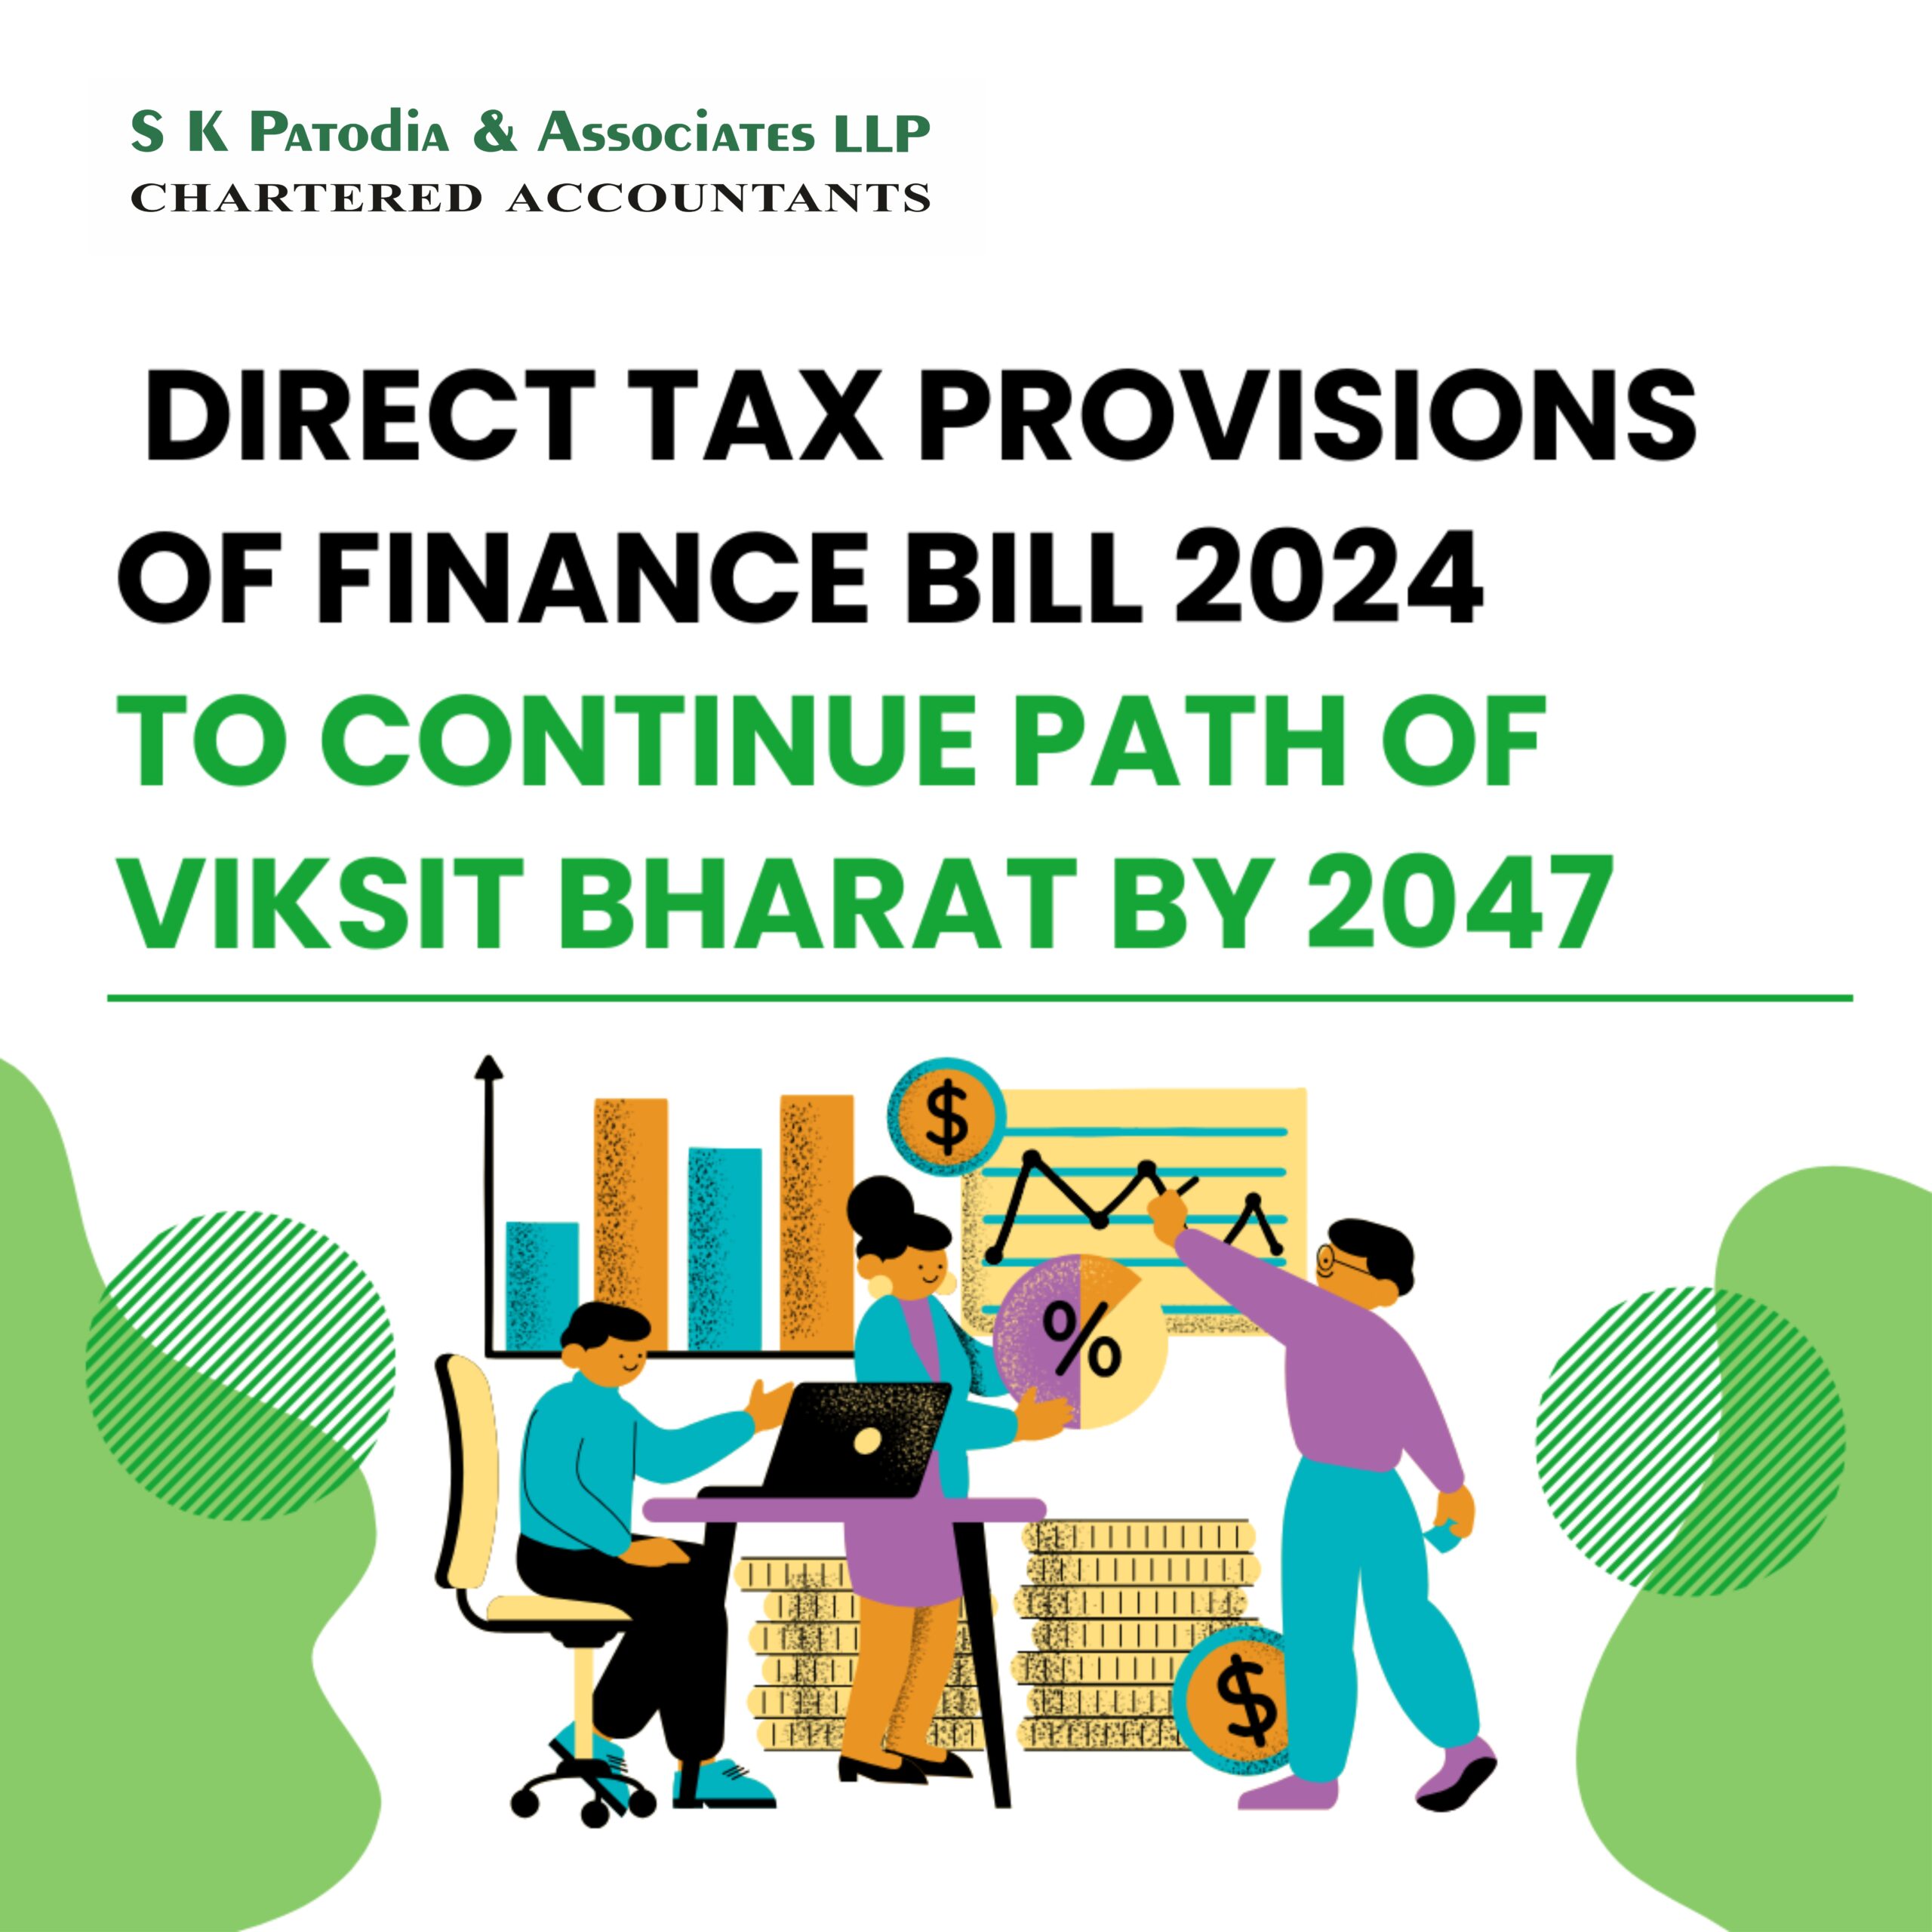 Direct Tax provisions of Finance Bill 2024 to continue path of Viksit Bharat by 2047